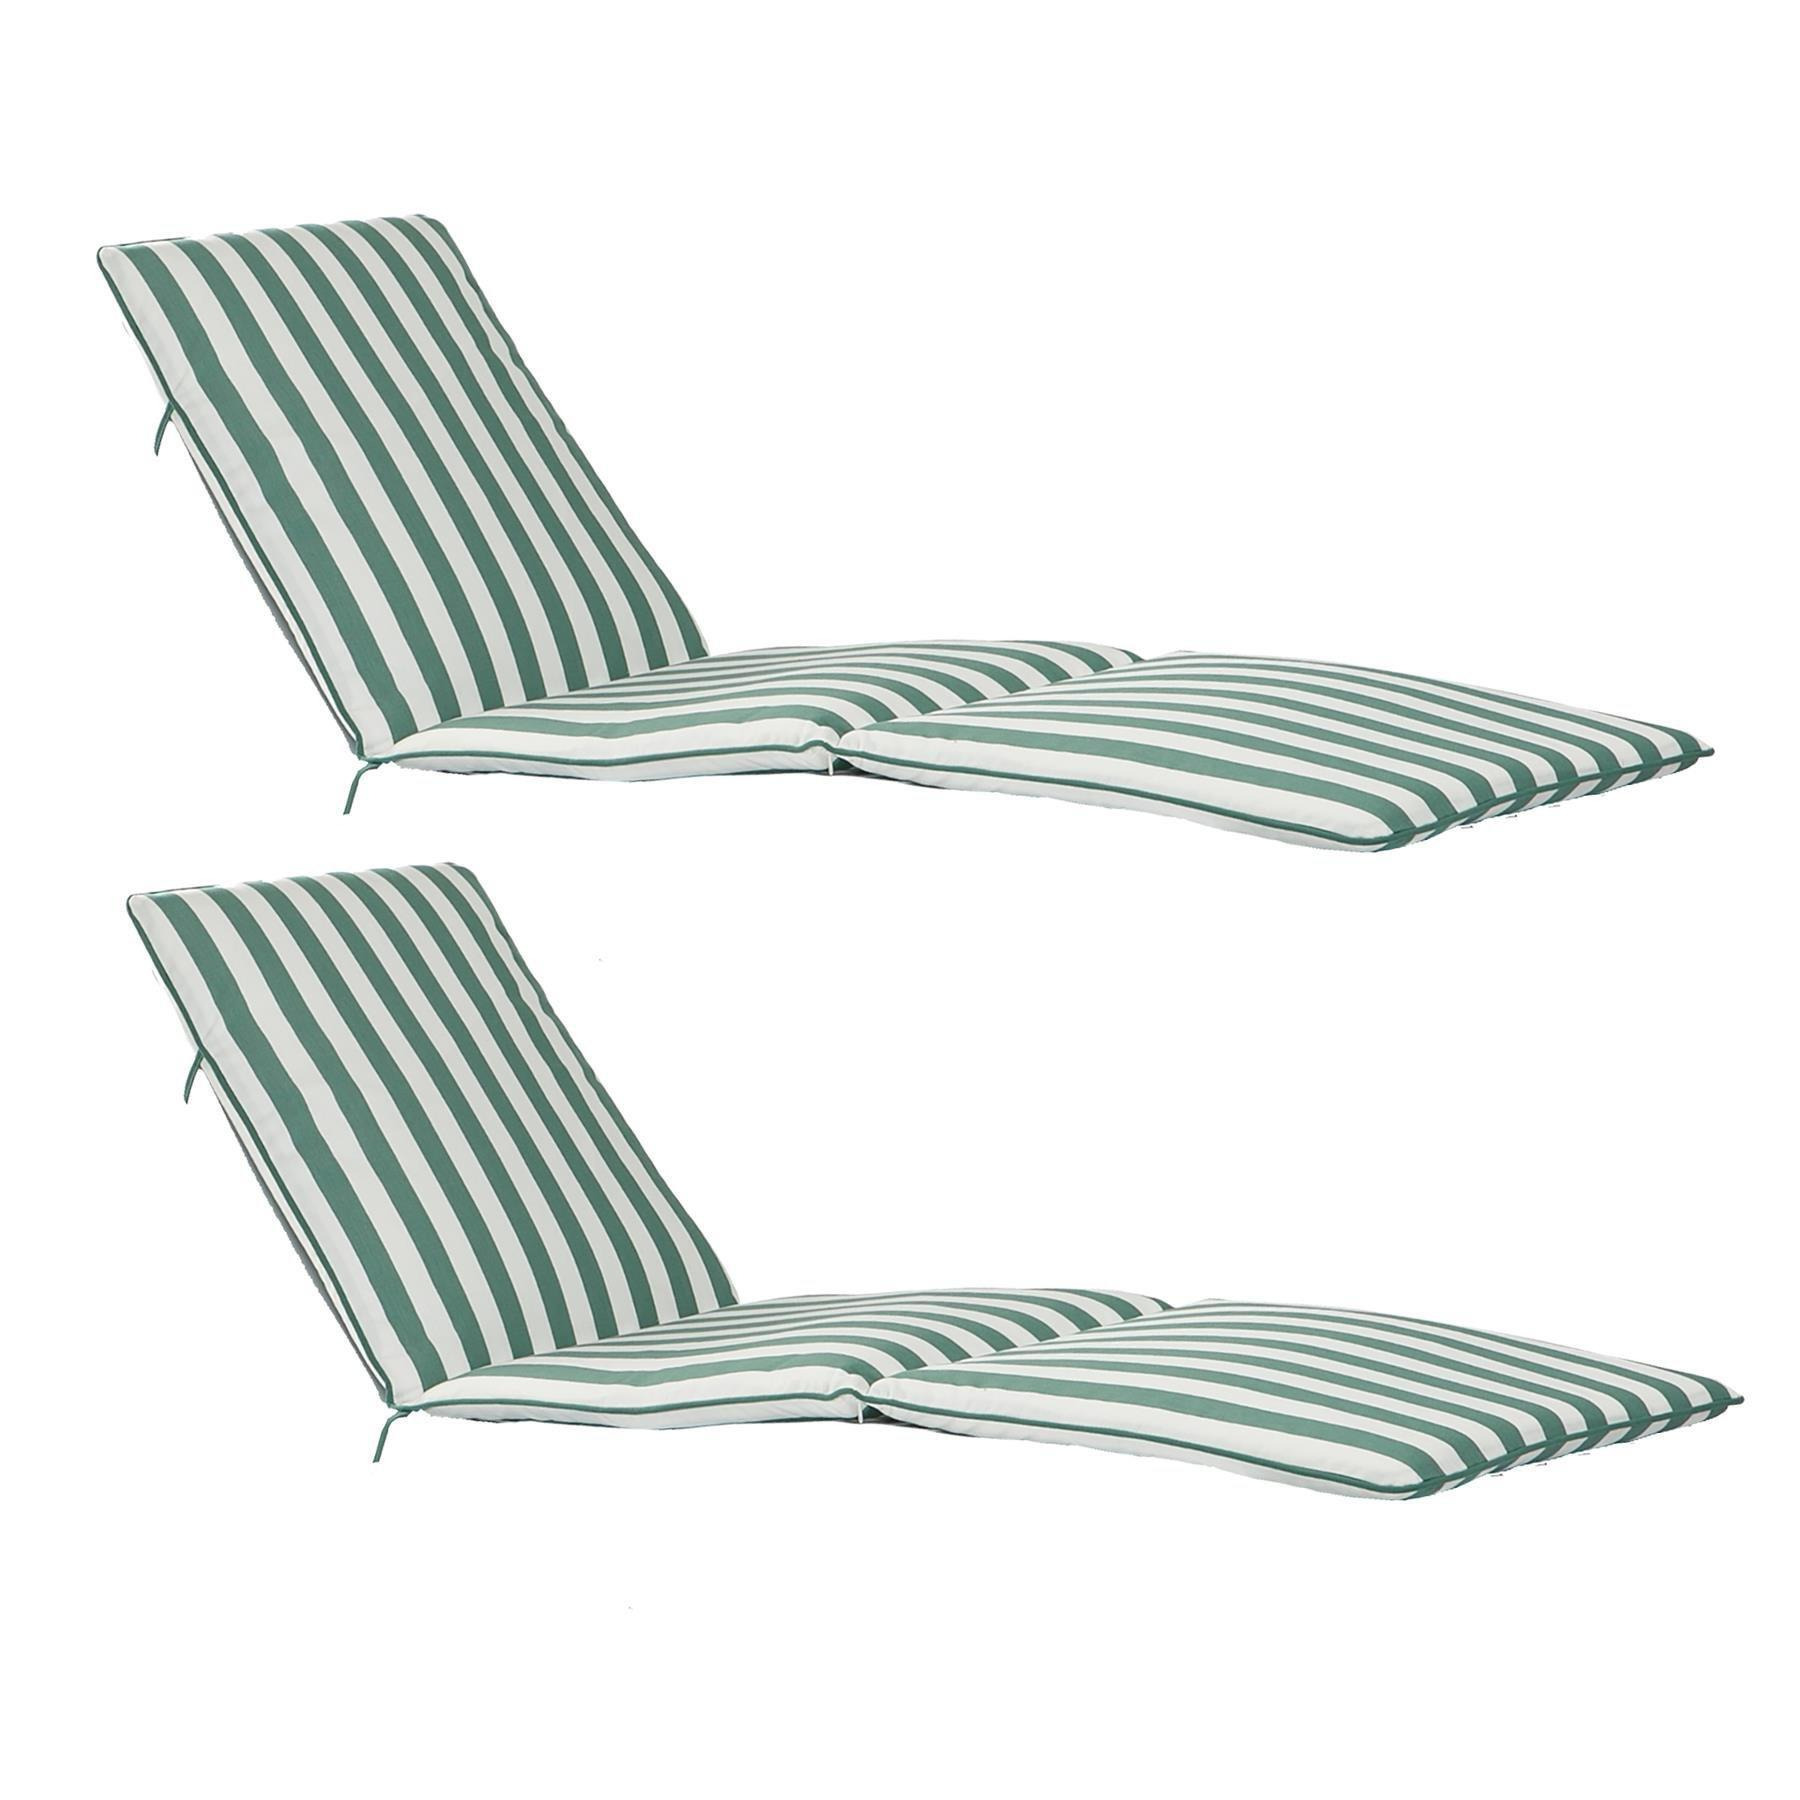 Master Sun Lounger Cushions Green Stripe Pack of 2 - image 1